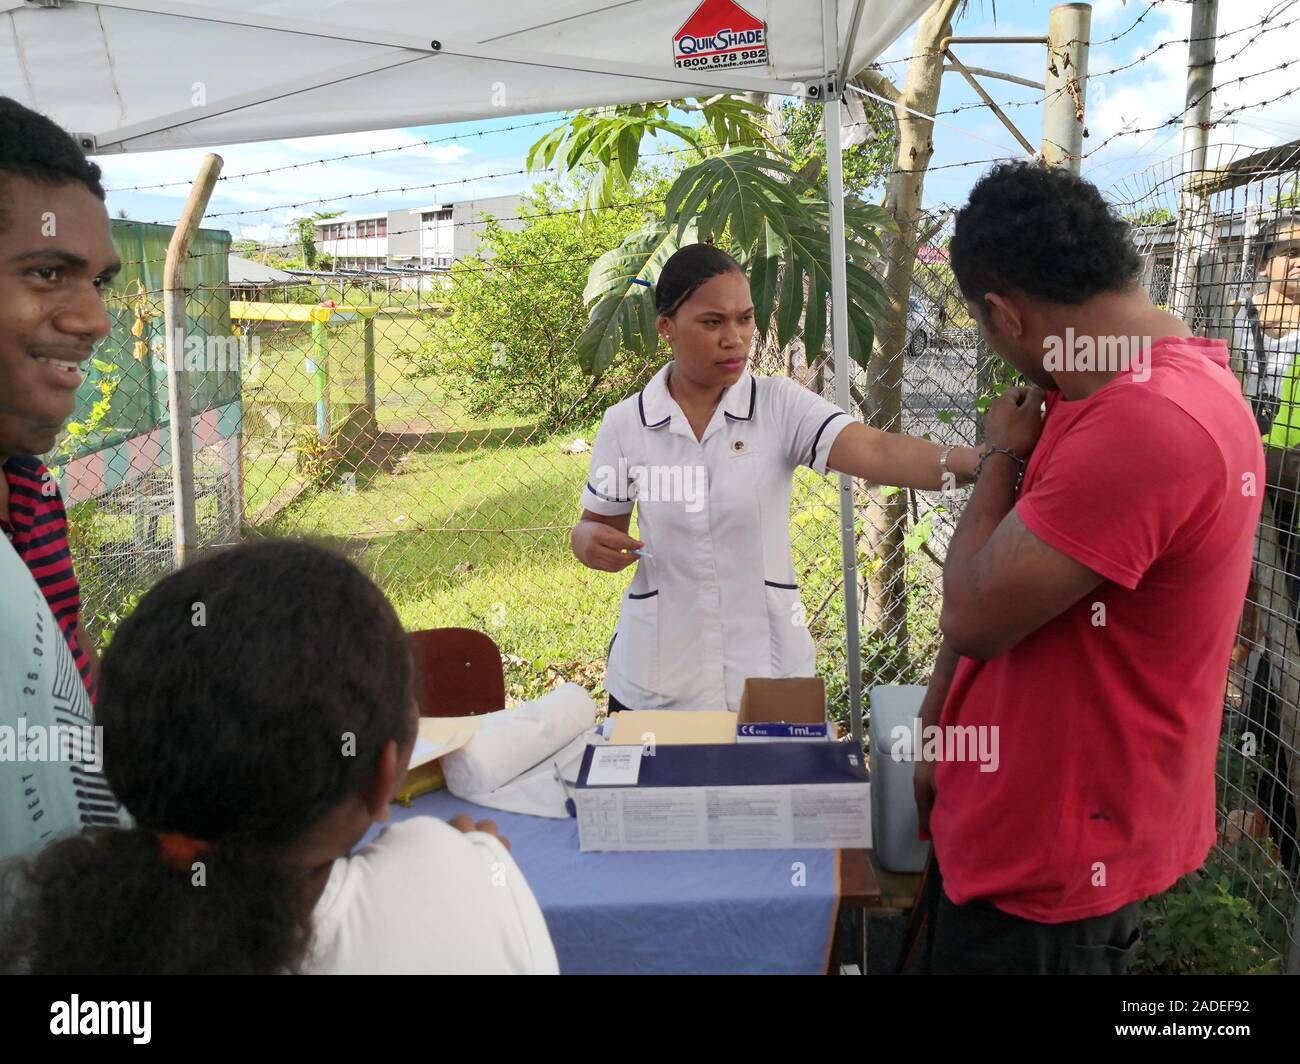 Suva, Fiji. 4th Dec, 2019. A resident receives measles vaccine in Suva, Fiji, Dec. 4, 2019. The second phase of the measles immunization campaign began on Wednesday in Fiji's capital Suva. The immunization campaign targets children who have not received two doses of the measles vaccine, any child aged 12 and 18 months who is due for immunization, people travelling overseas, healthcare workers, and airport and hotel staff around the country. There are 15 confirmed measles cases in Fiji by Tuesday. Credit: Zhang Yongxing/Xinhua/Alamy Live News Stock Photo